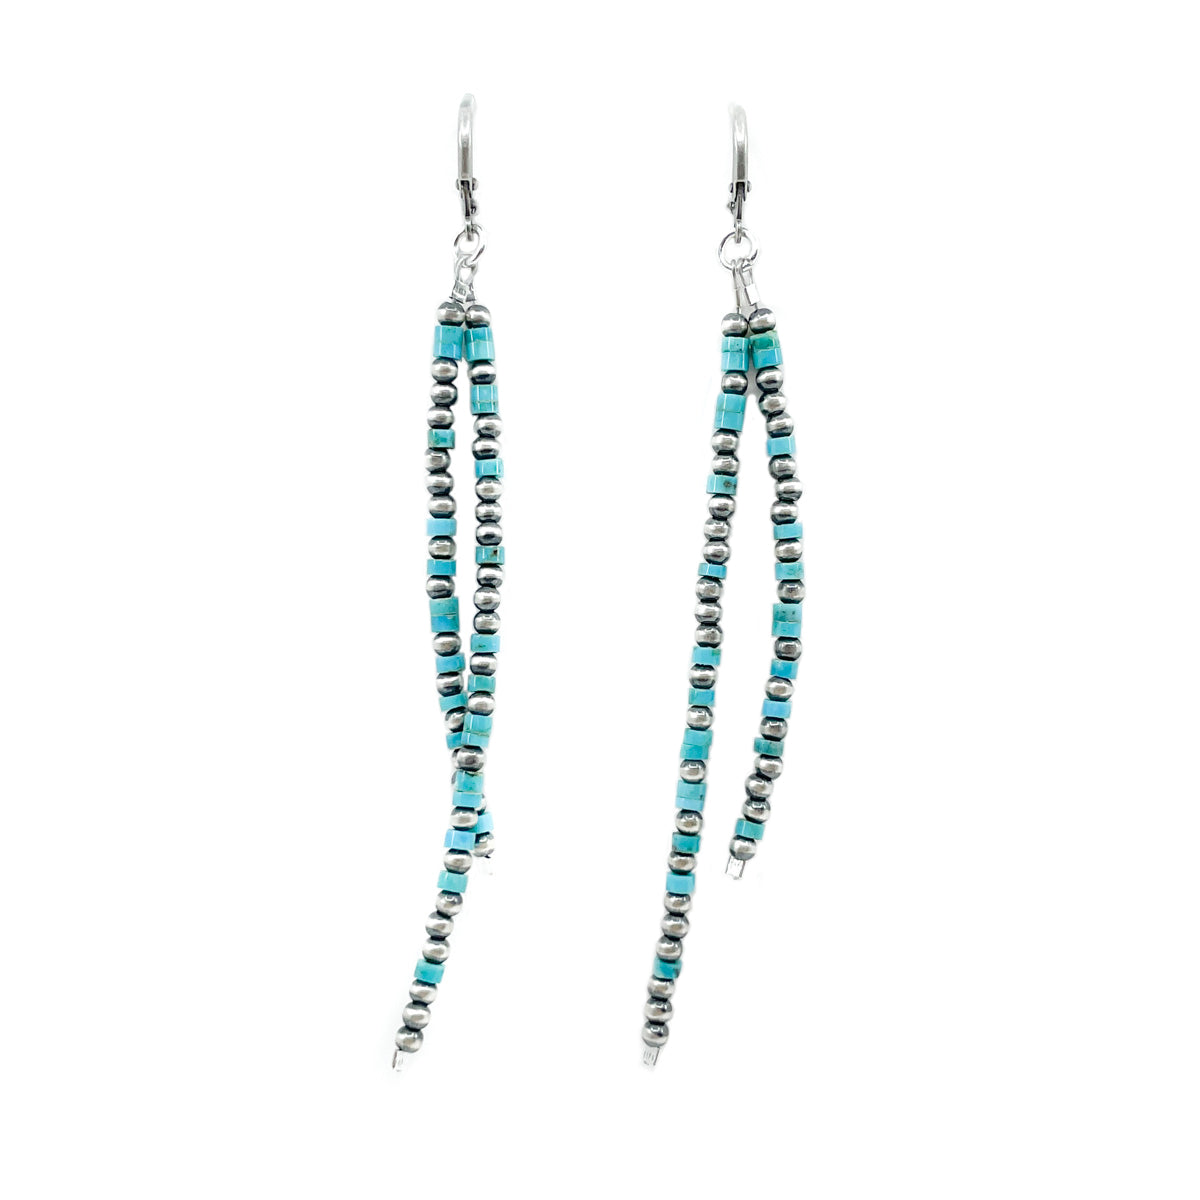 Sterling silver lever back ear wires by Esther Reano Turquoise Heishe beads with sterling silver beads Measures approx. 3.25 inches long, dangles 3.5 inches from earlobe